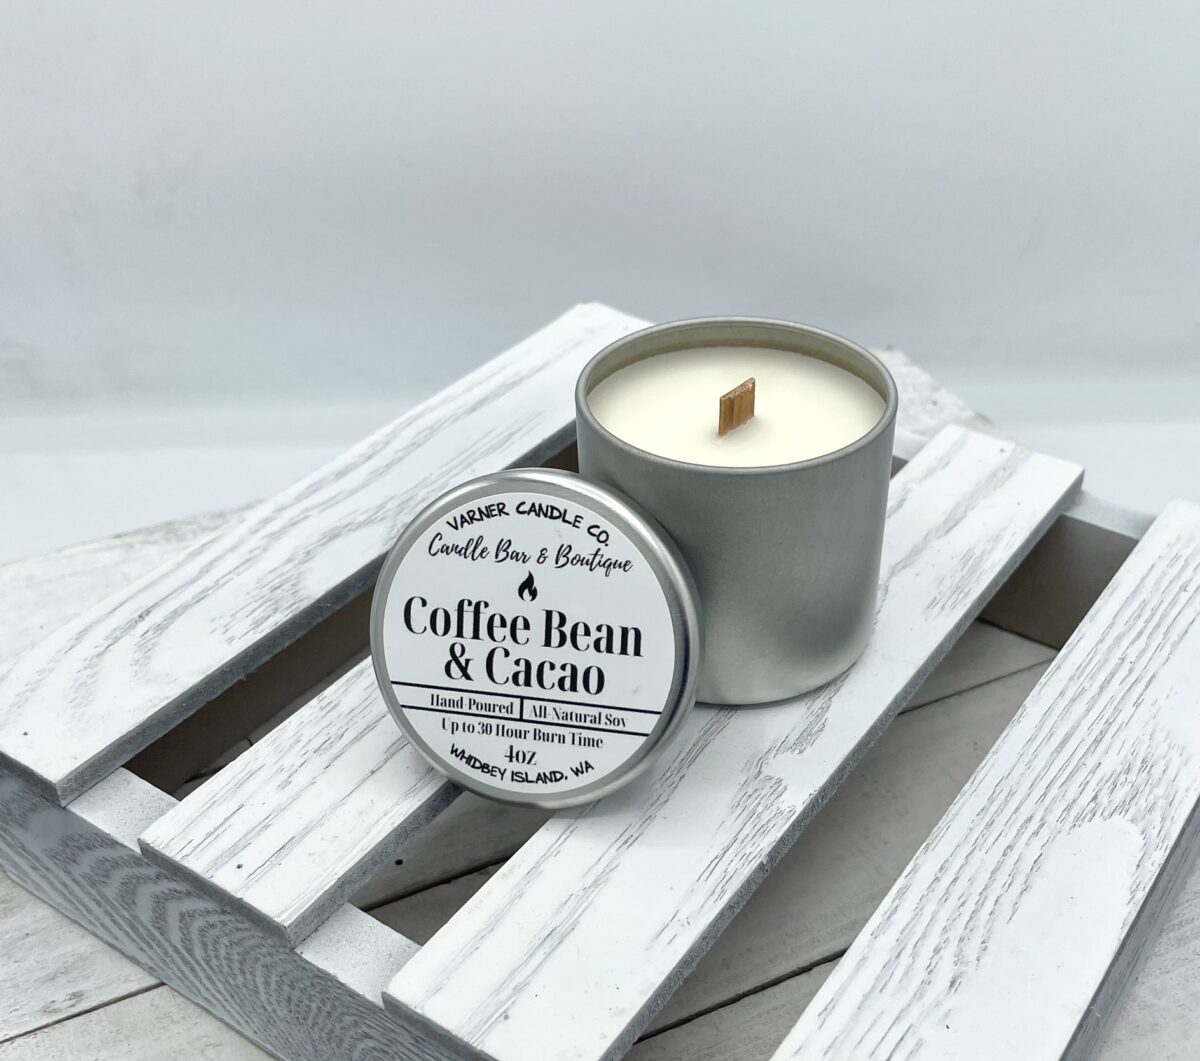 Coffee & Cacao Bean scented candle in 4oz silver tin with wooden wick